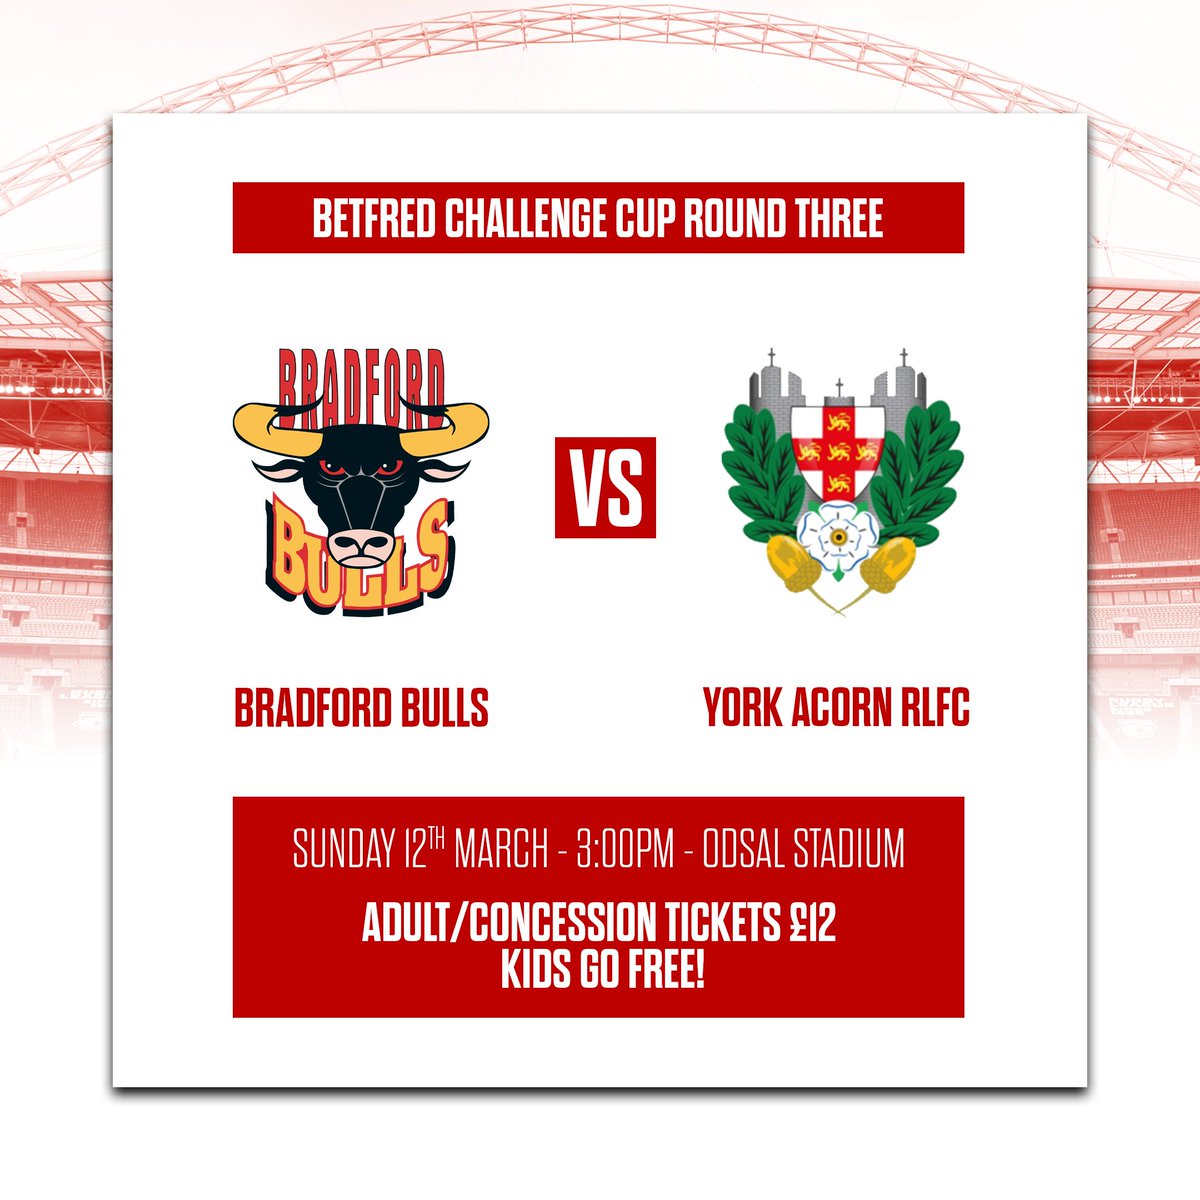 📅 | We can confirm our @Betfred @TheChallengeCup Third Round clash with @yorkacorn will take place on Sunday 12th March at 3:00pm. 🎟️ | Tickets go on sale from 10am tomorrow morning...